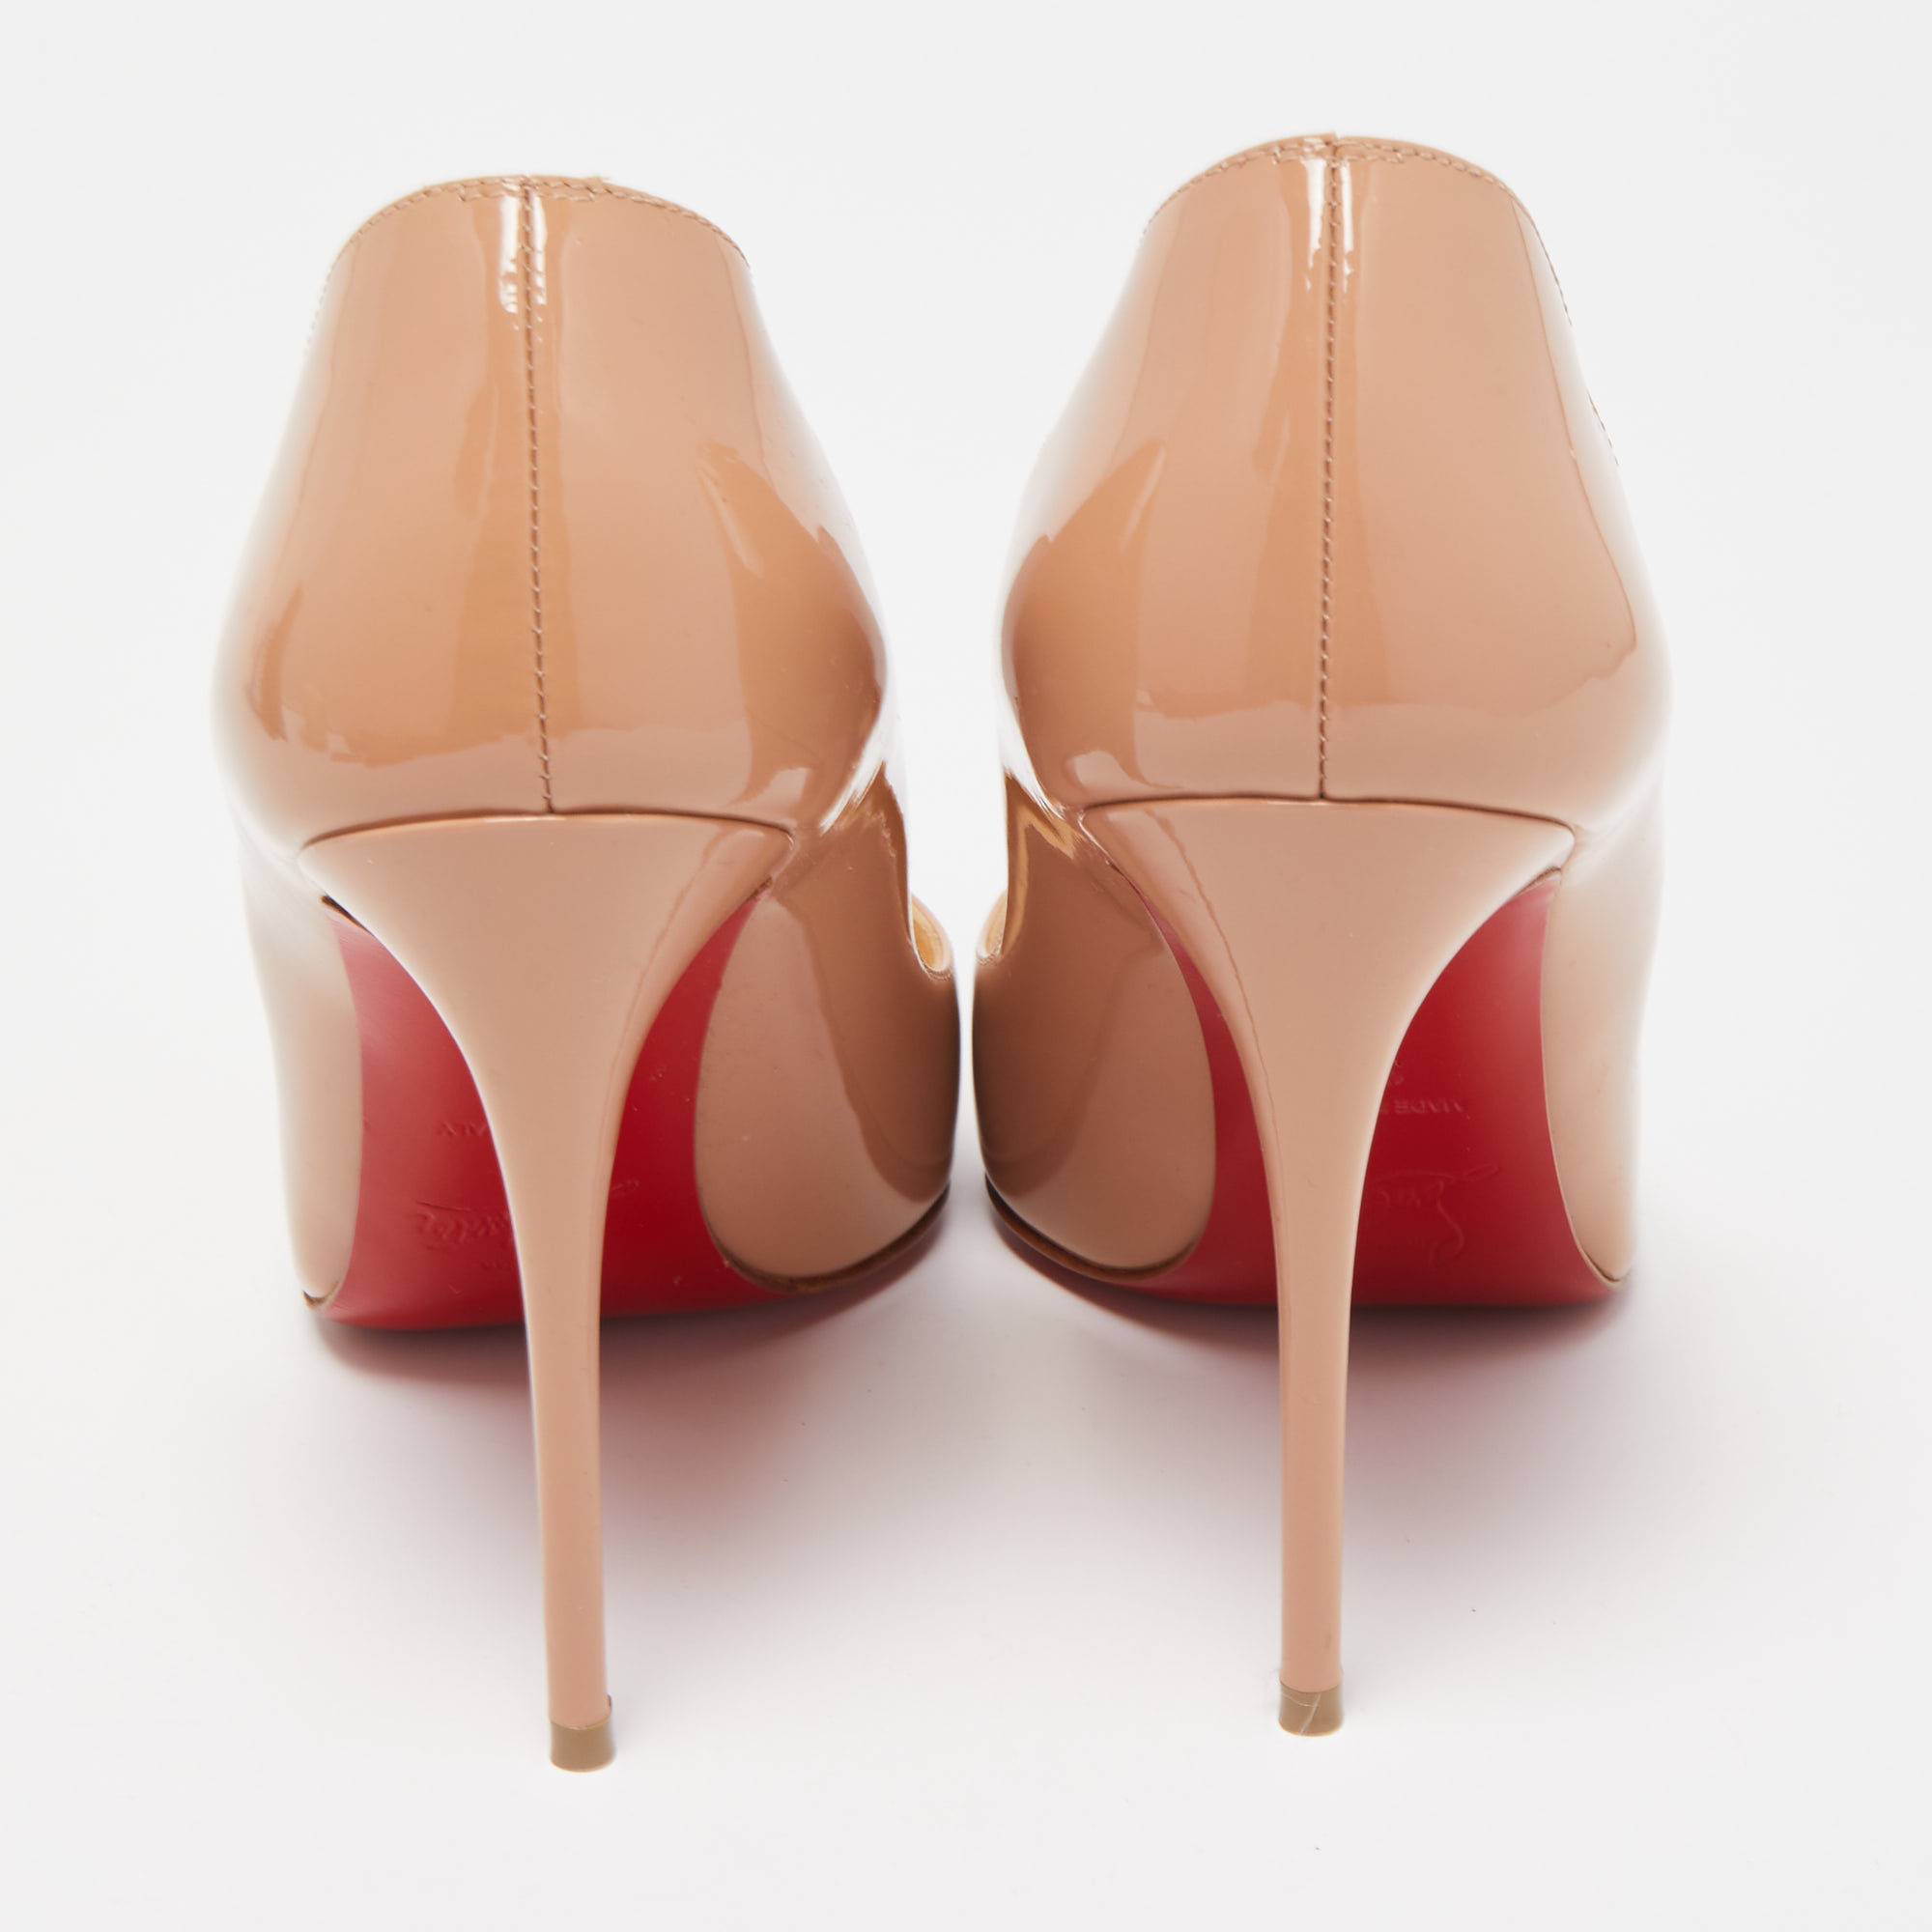 Christian Louboutin Beige Patent Leather Hot Chick Pointed Toe Pumps Size 36